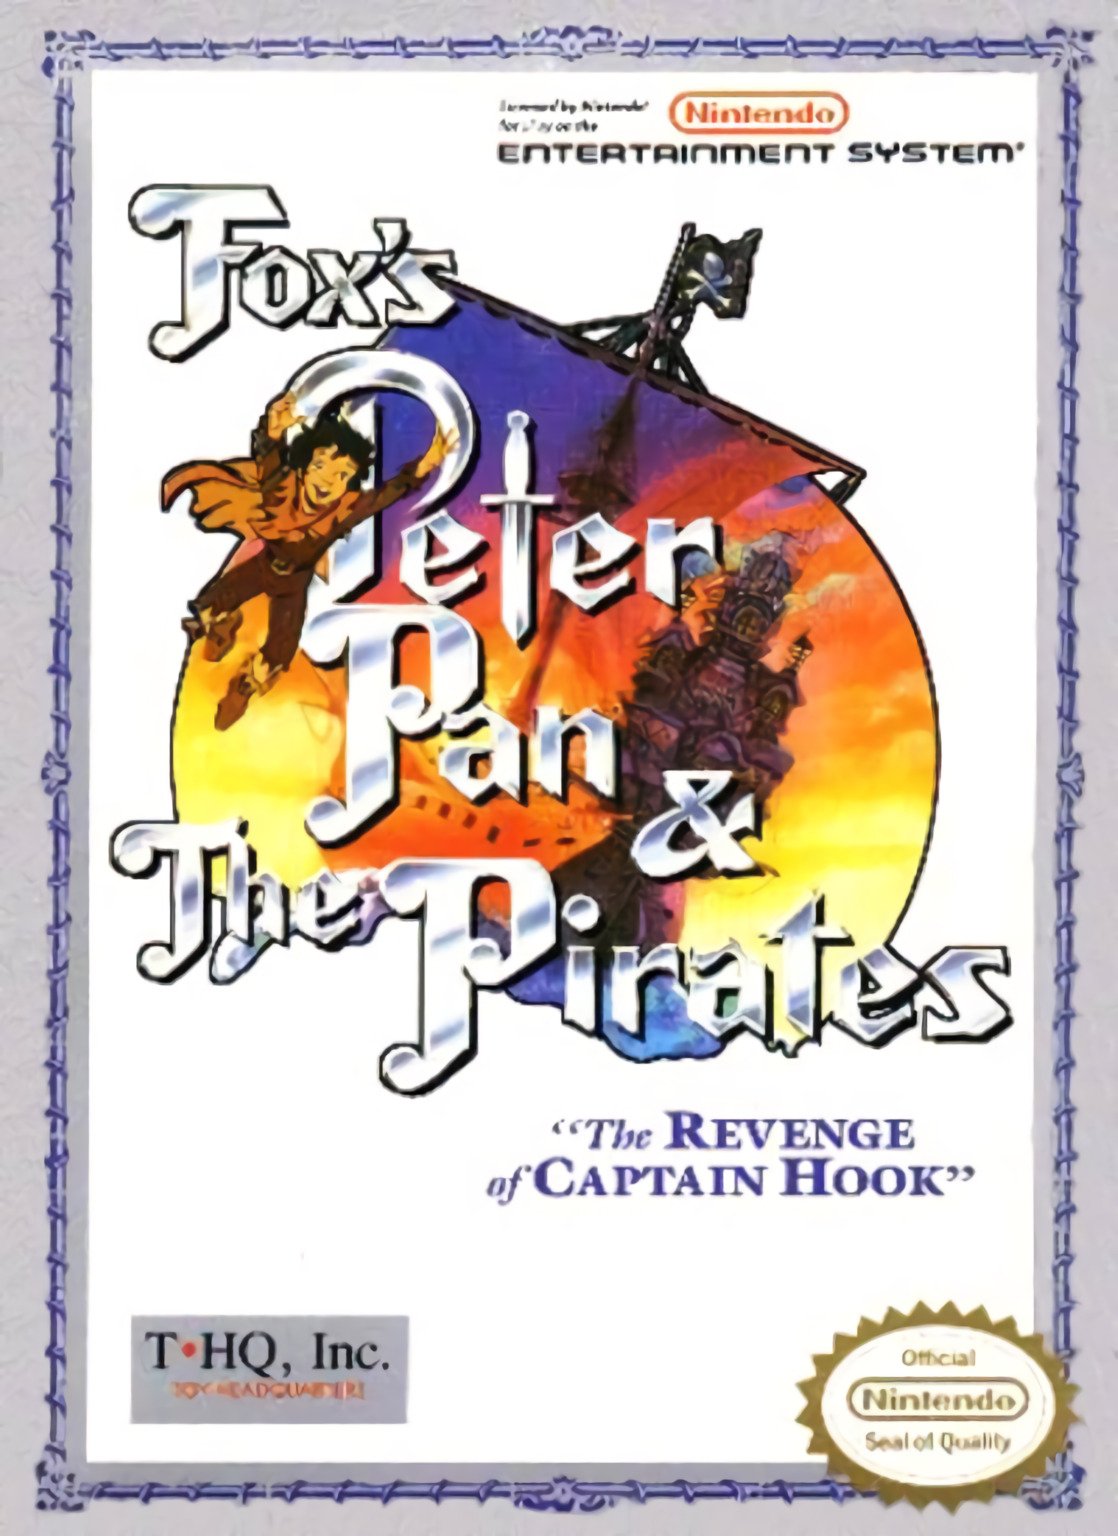 Peter Pan & The Pirates - The Revenge of Captain Hook